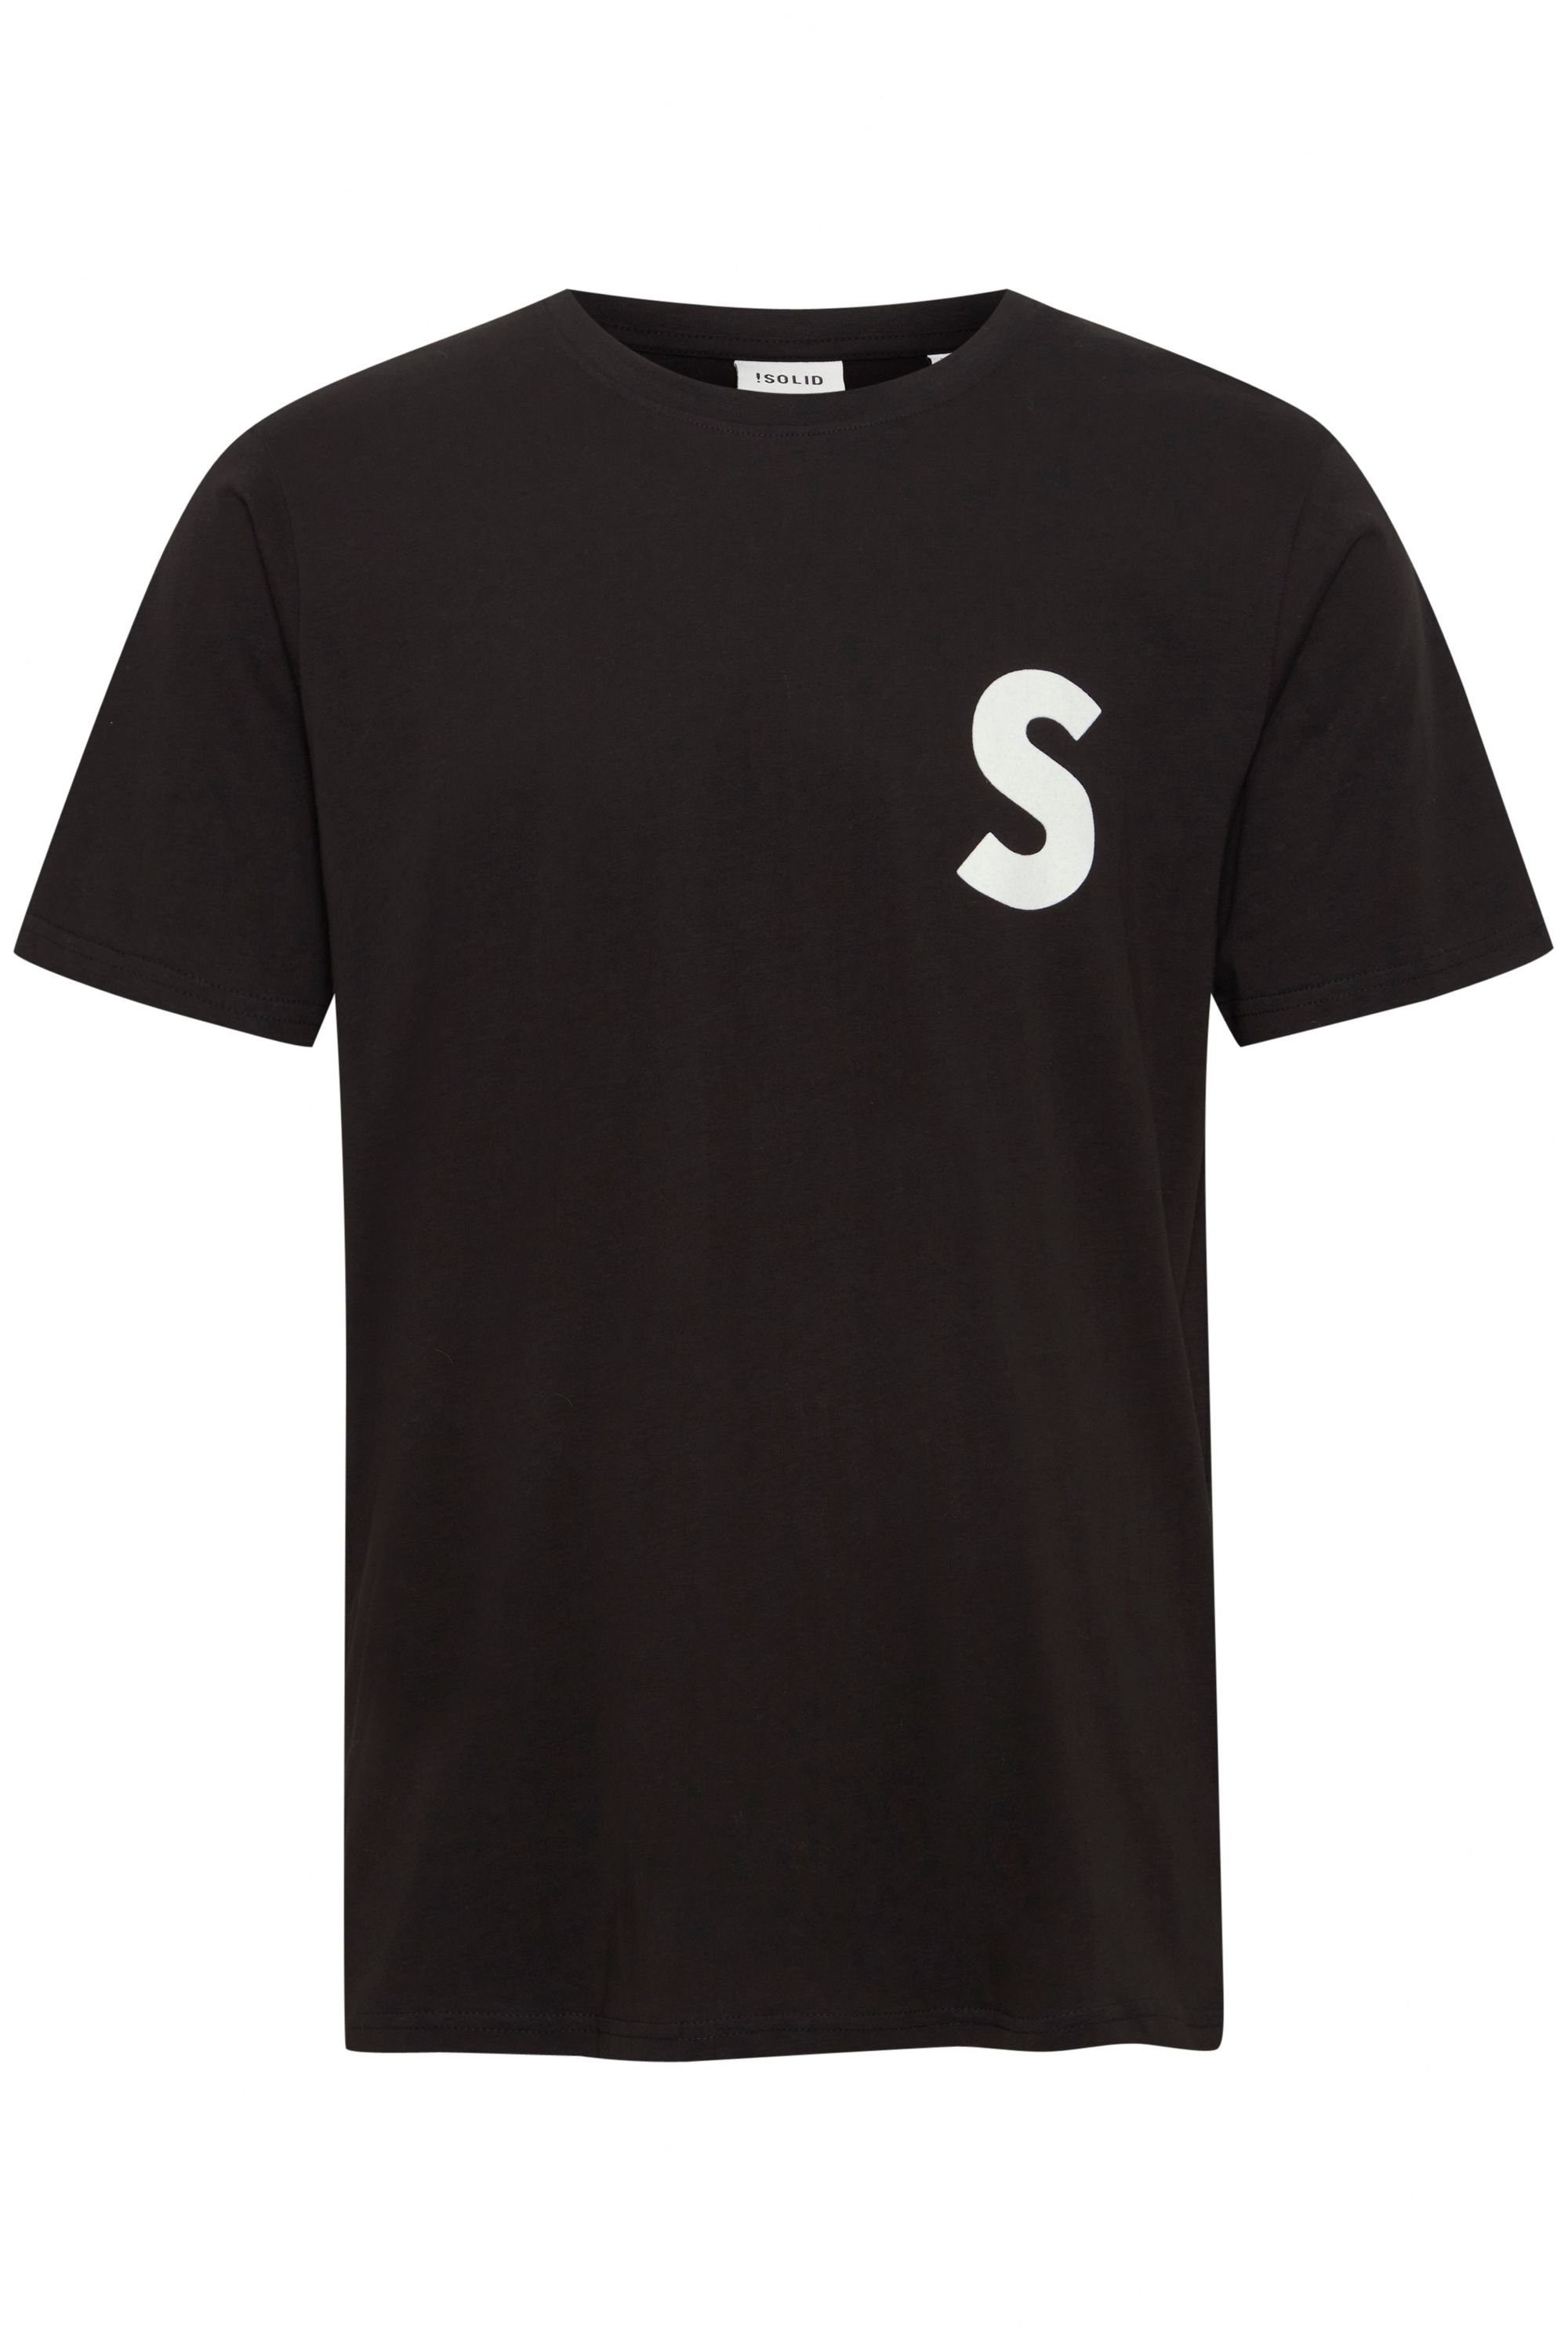 21107225 (194008) !Solid SDCarchie Black T-Shirt True SS4